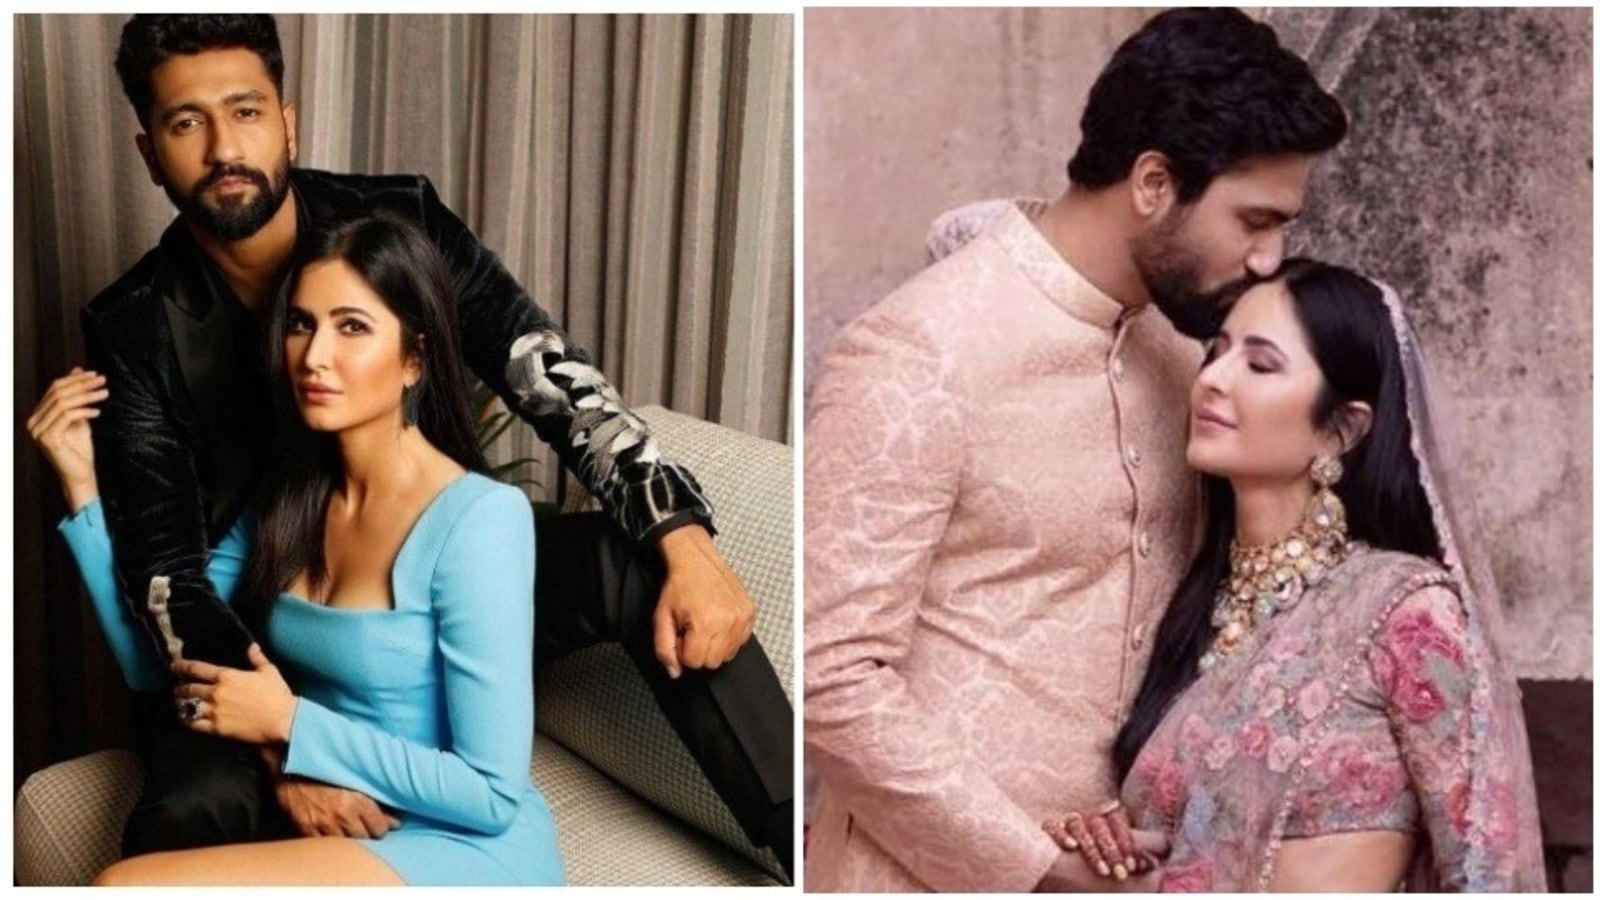 Vicky Kaushal calls wife Katrina Kaif a ‘great influence’ in his life: ‘I learn a lot from her every single day’